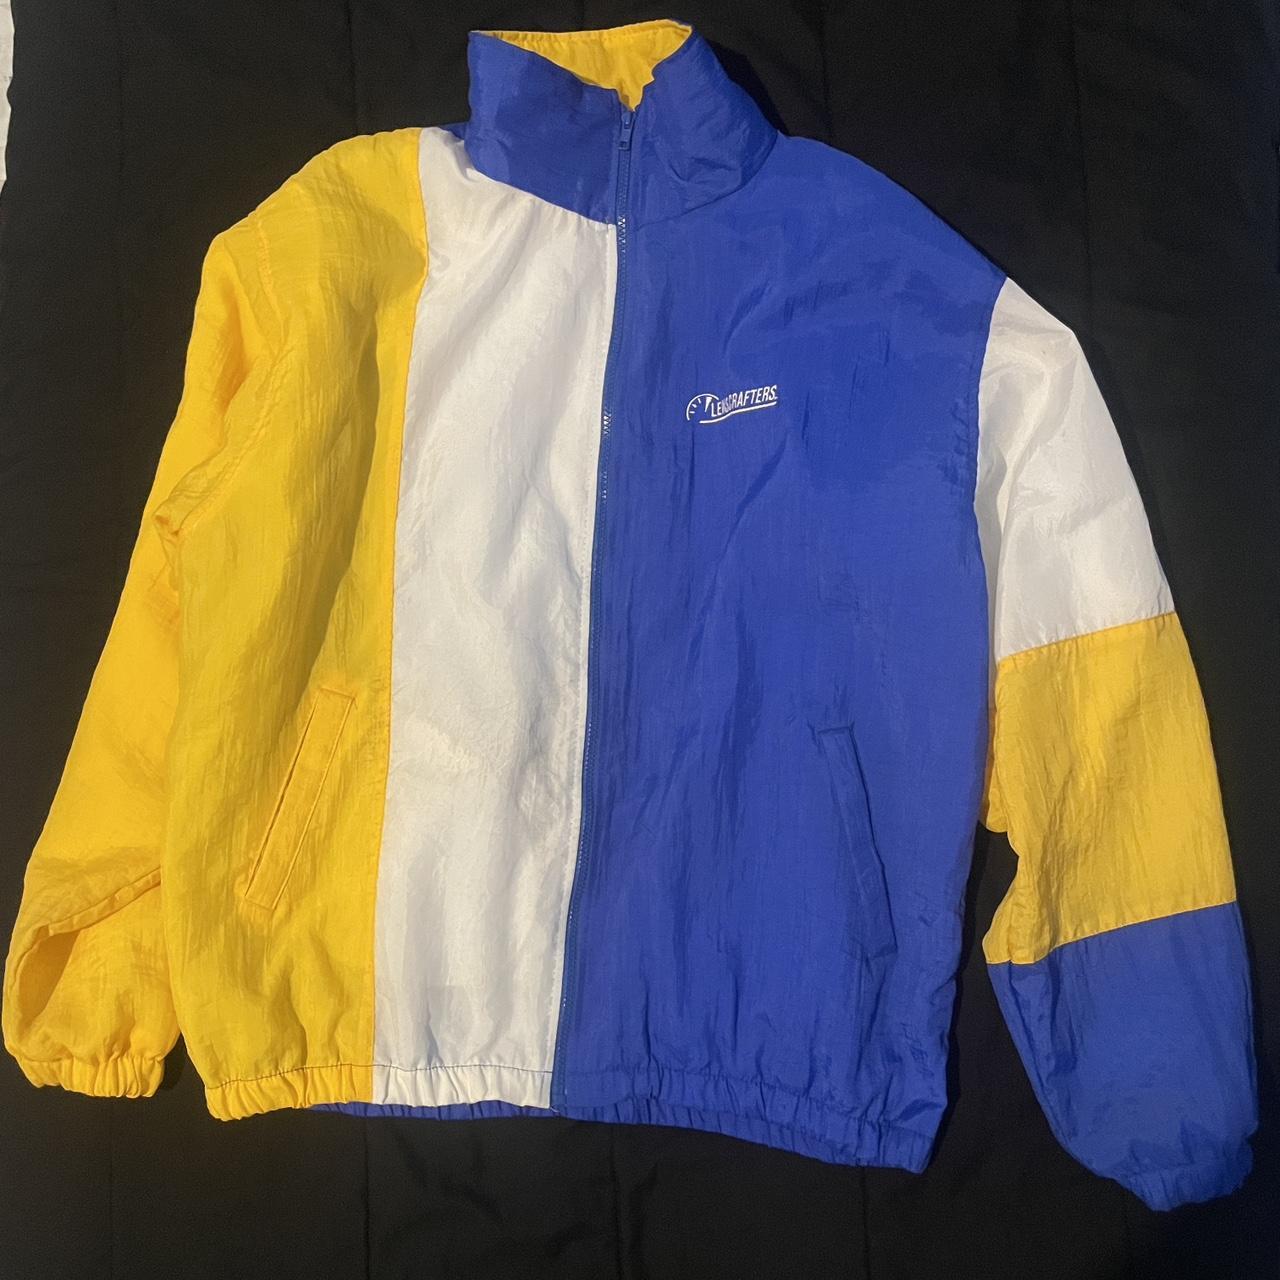 item listed by varietythrifting